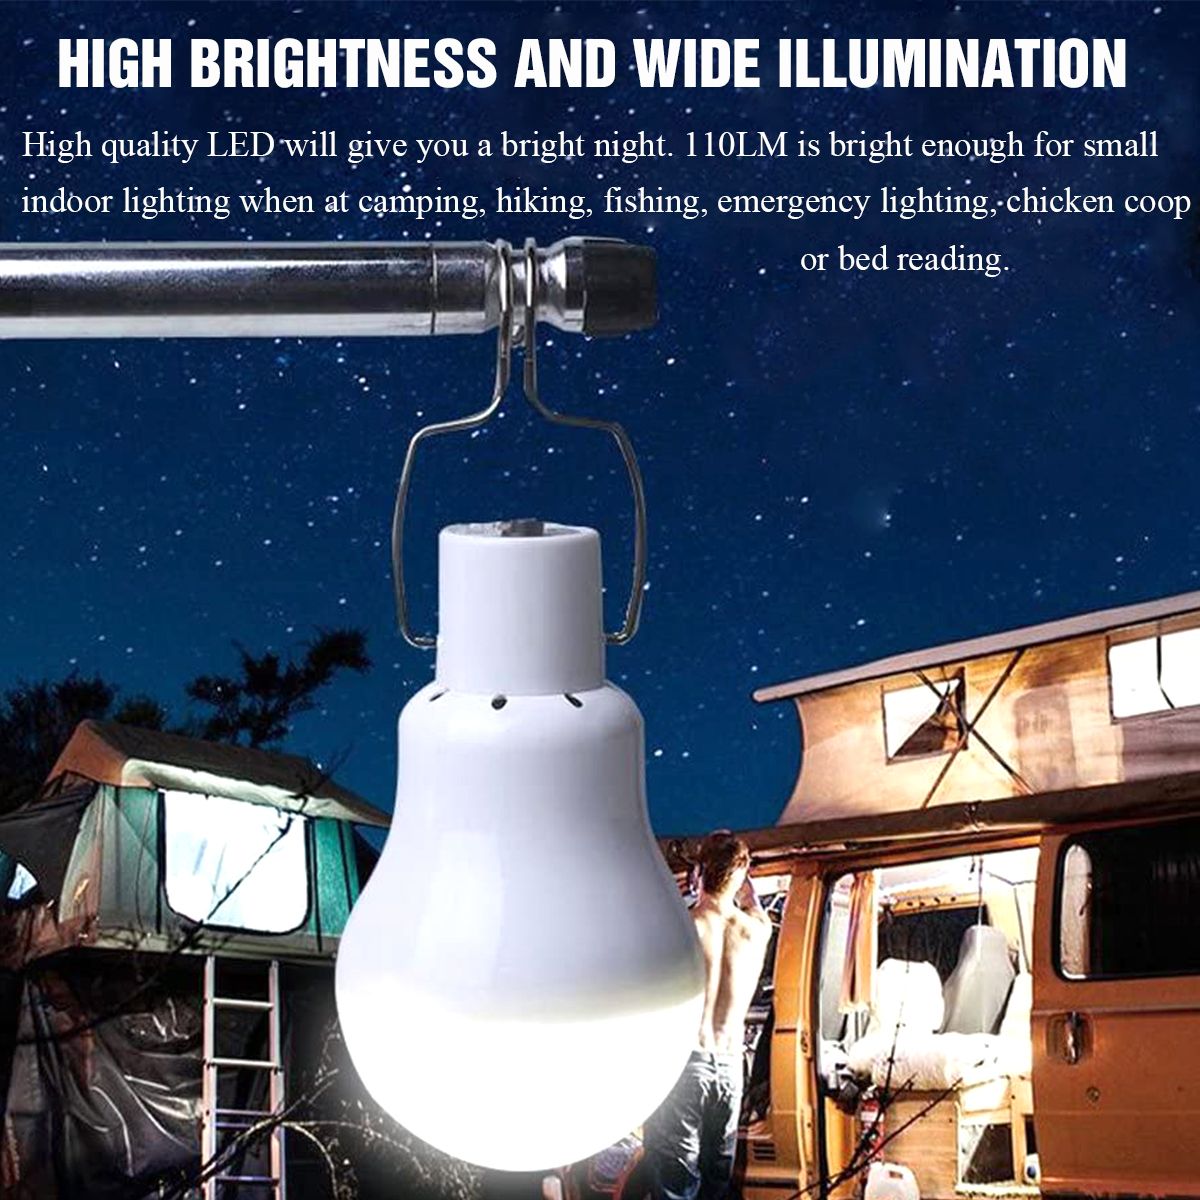 3x-LED-Light-Bulb-Lamp--Solar-Powered-Shed-Portable-Hang-Hooking-Chicken-Coop-1753815